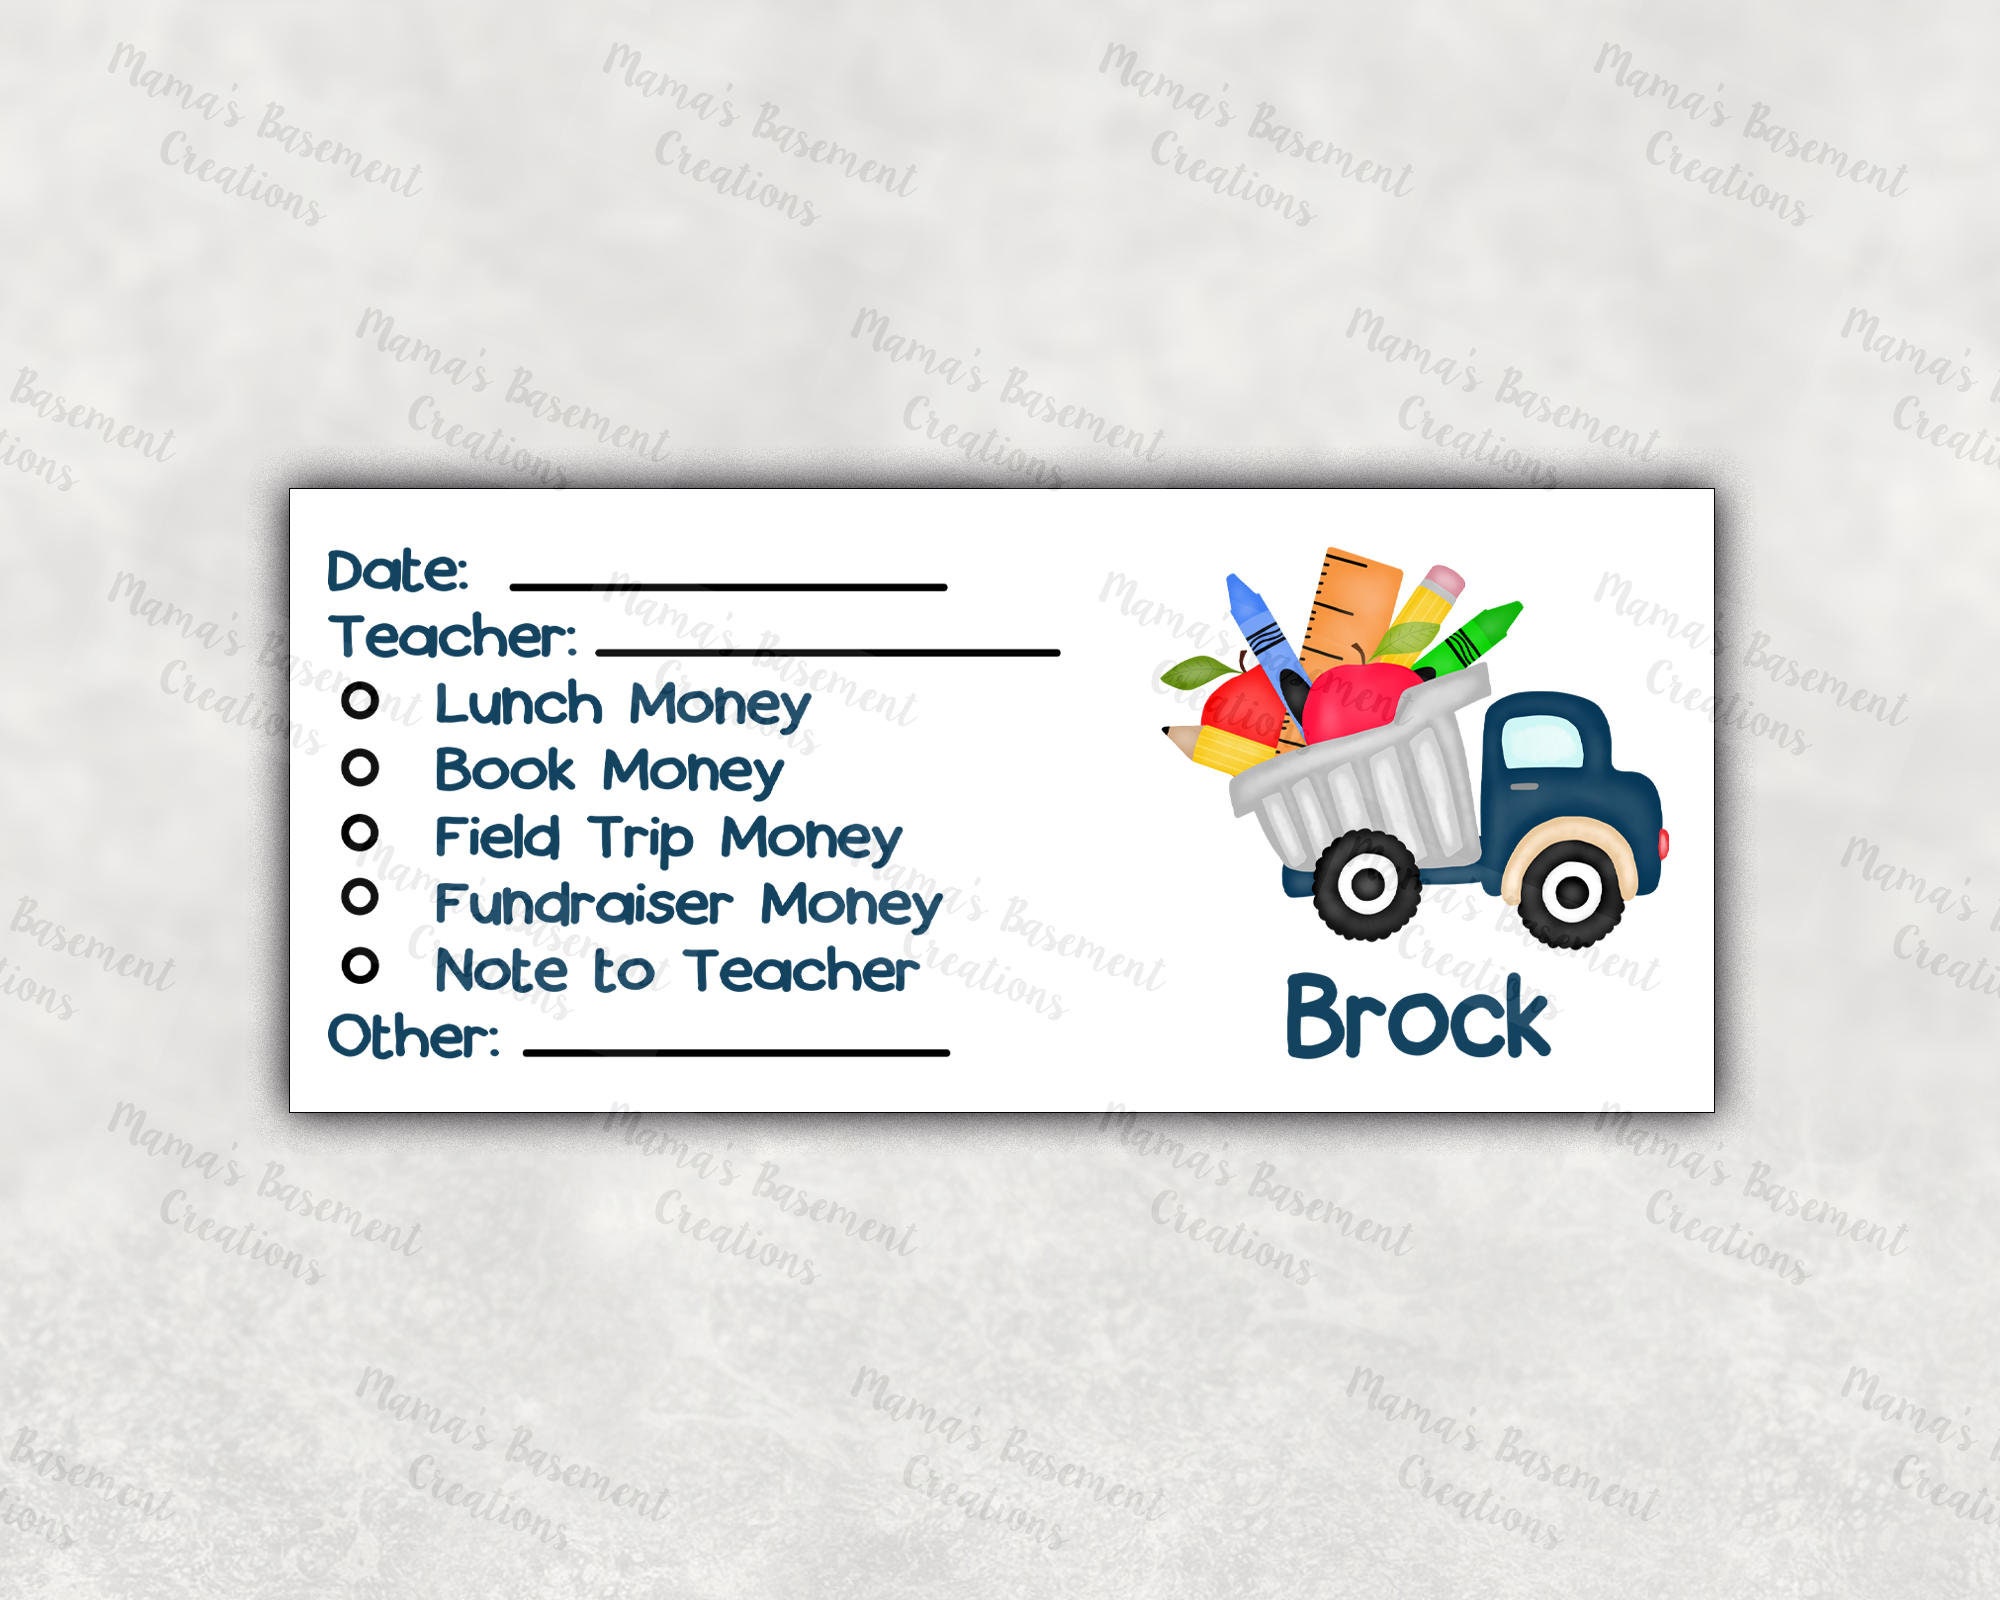 Personalized Envelopes School Apple Envelopes for Field Trip, Tuition  Money, Etc. Set of 25 / Back to School 